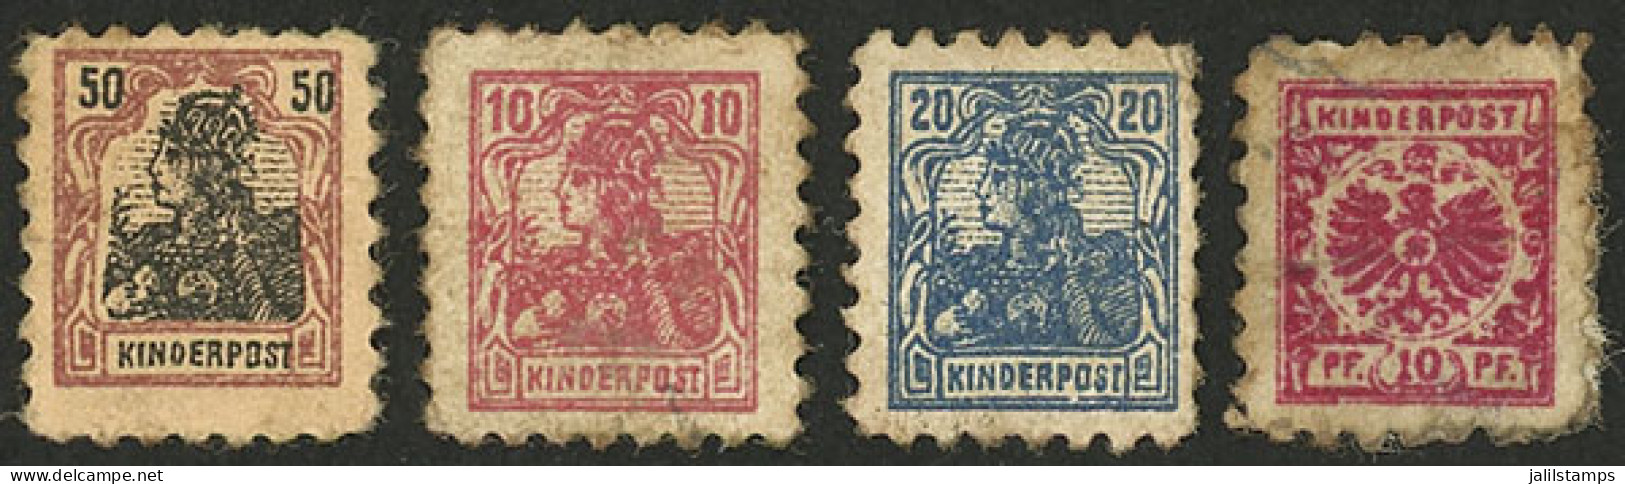 GERMANY: KINDERPOST: 4 Very Small Stamps, Minor Defects, Very Interesting! - Erinofilia